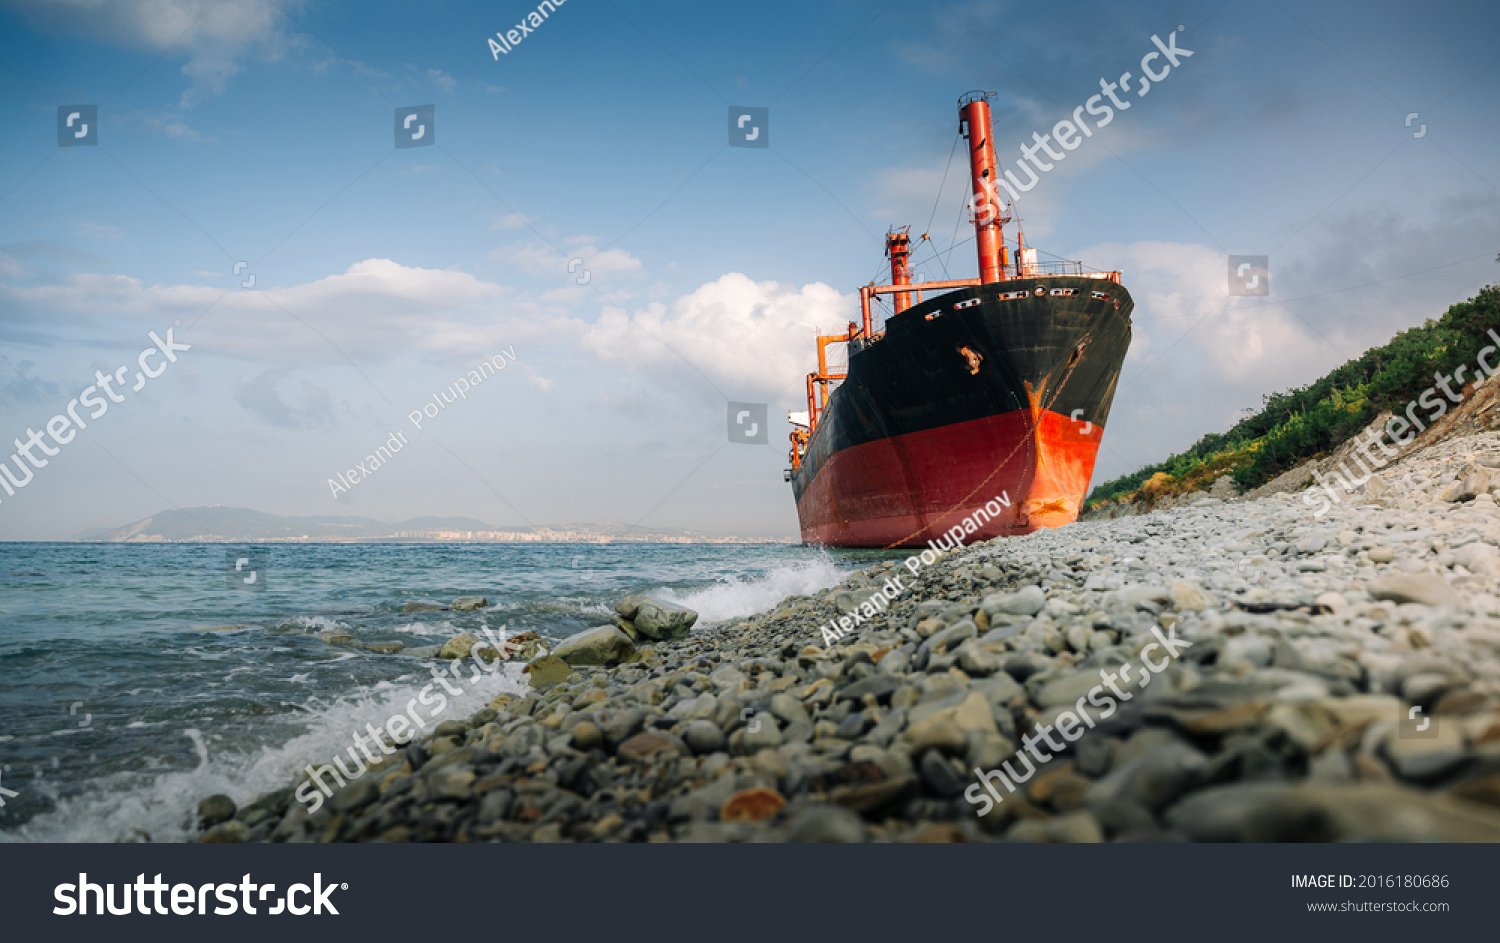 Dry cargo ship "RIO" stranded in the Black Sea not far from the village of Kabardinka, Russia #2016180686